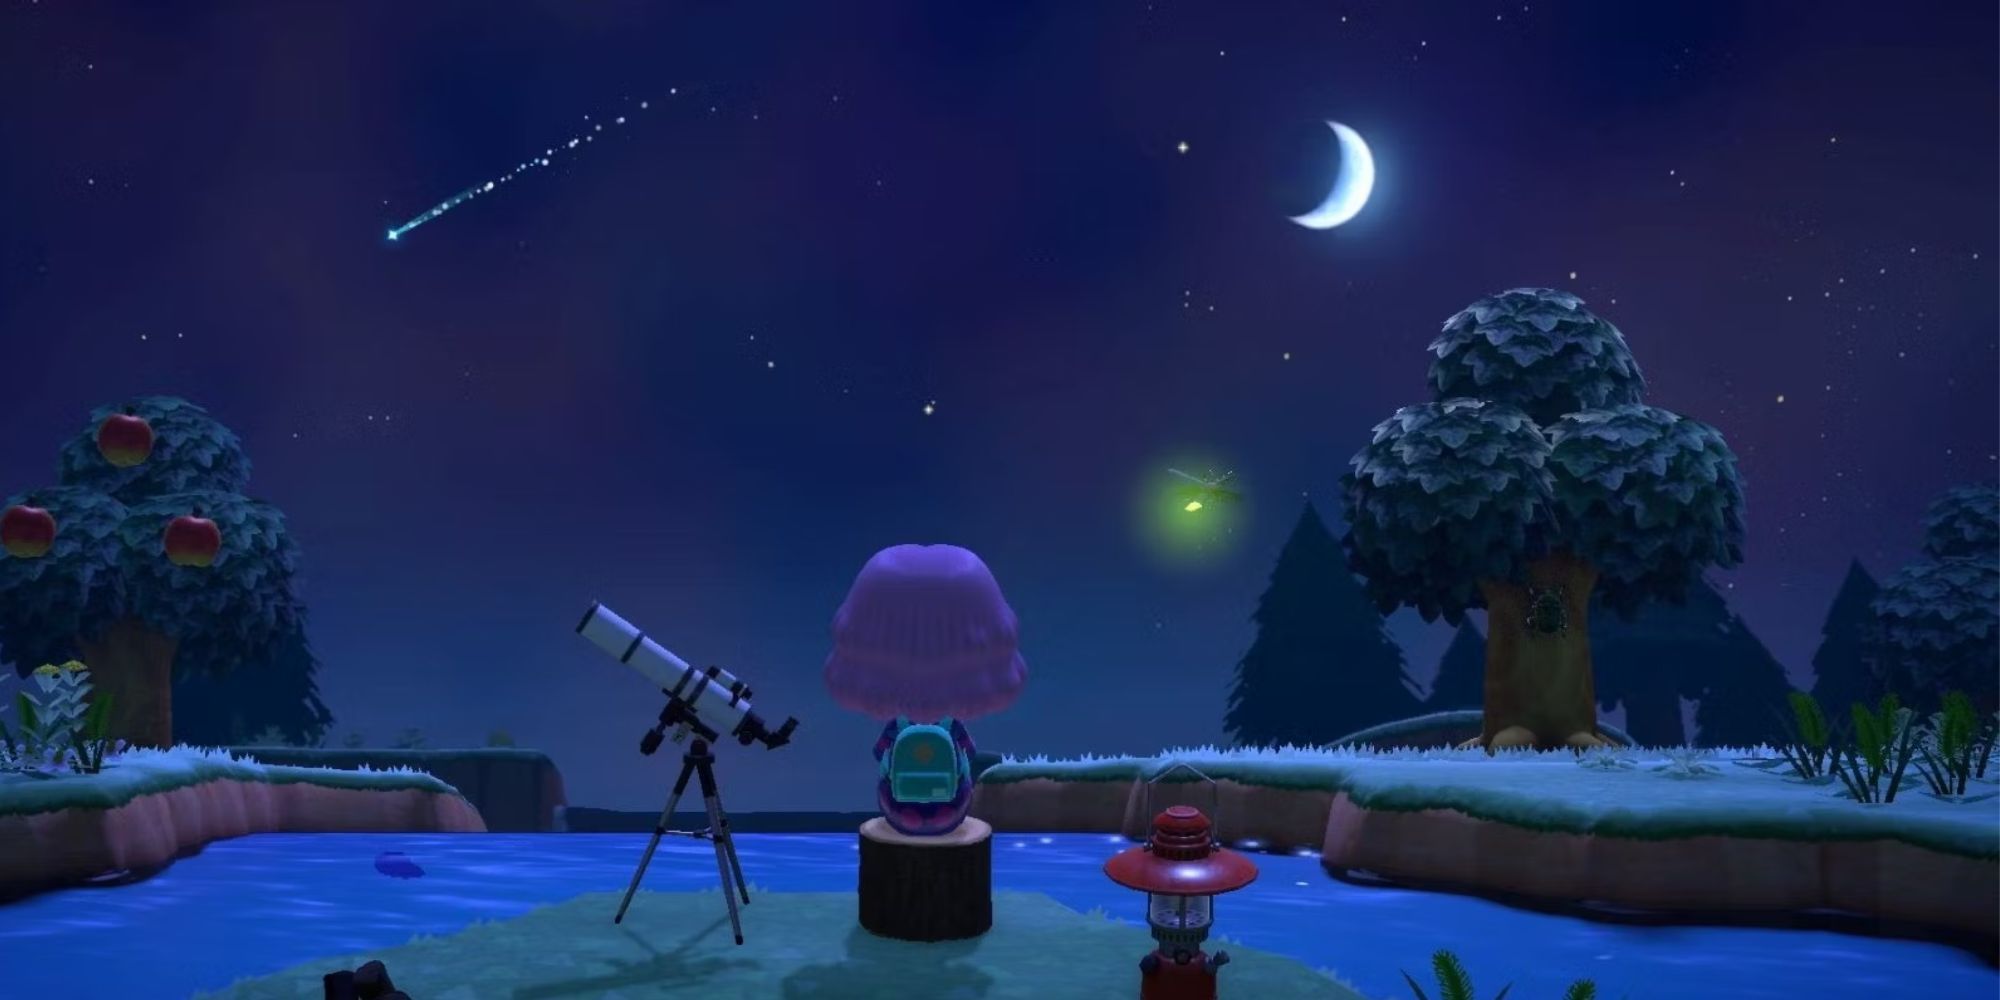 Animal Crossing player stargazing with a crescent-shaped moon in the foreground